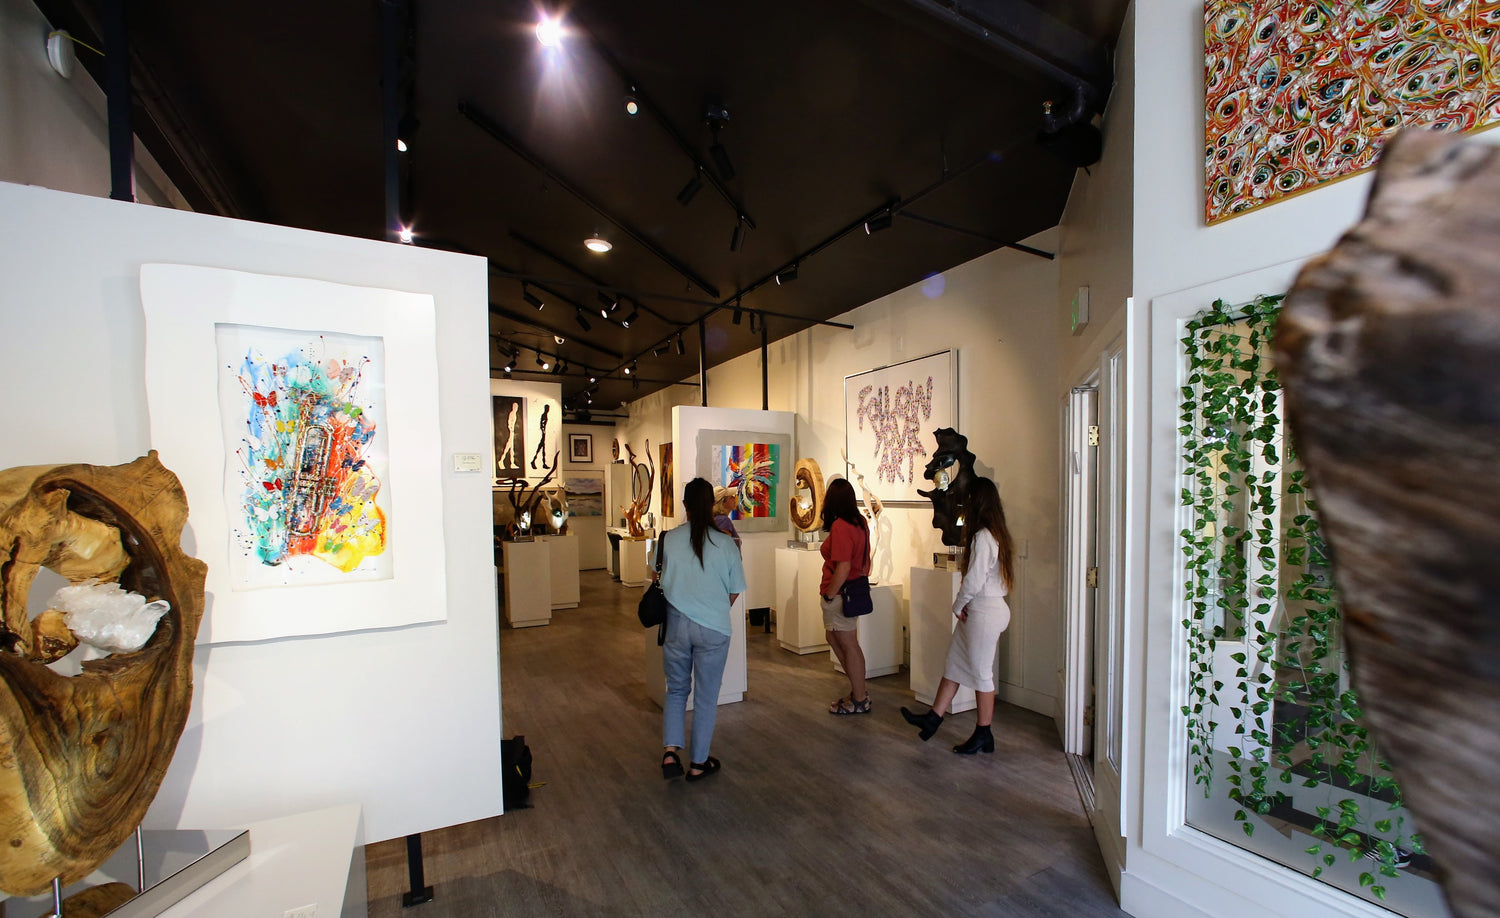 Inside of gallery with customers, sculptures, and paintings